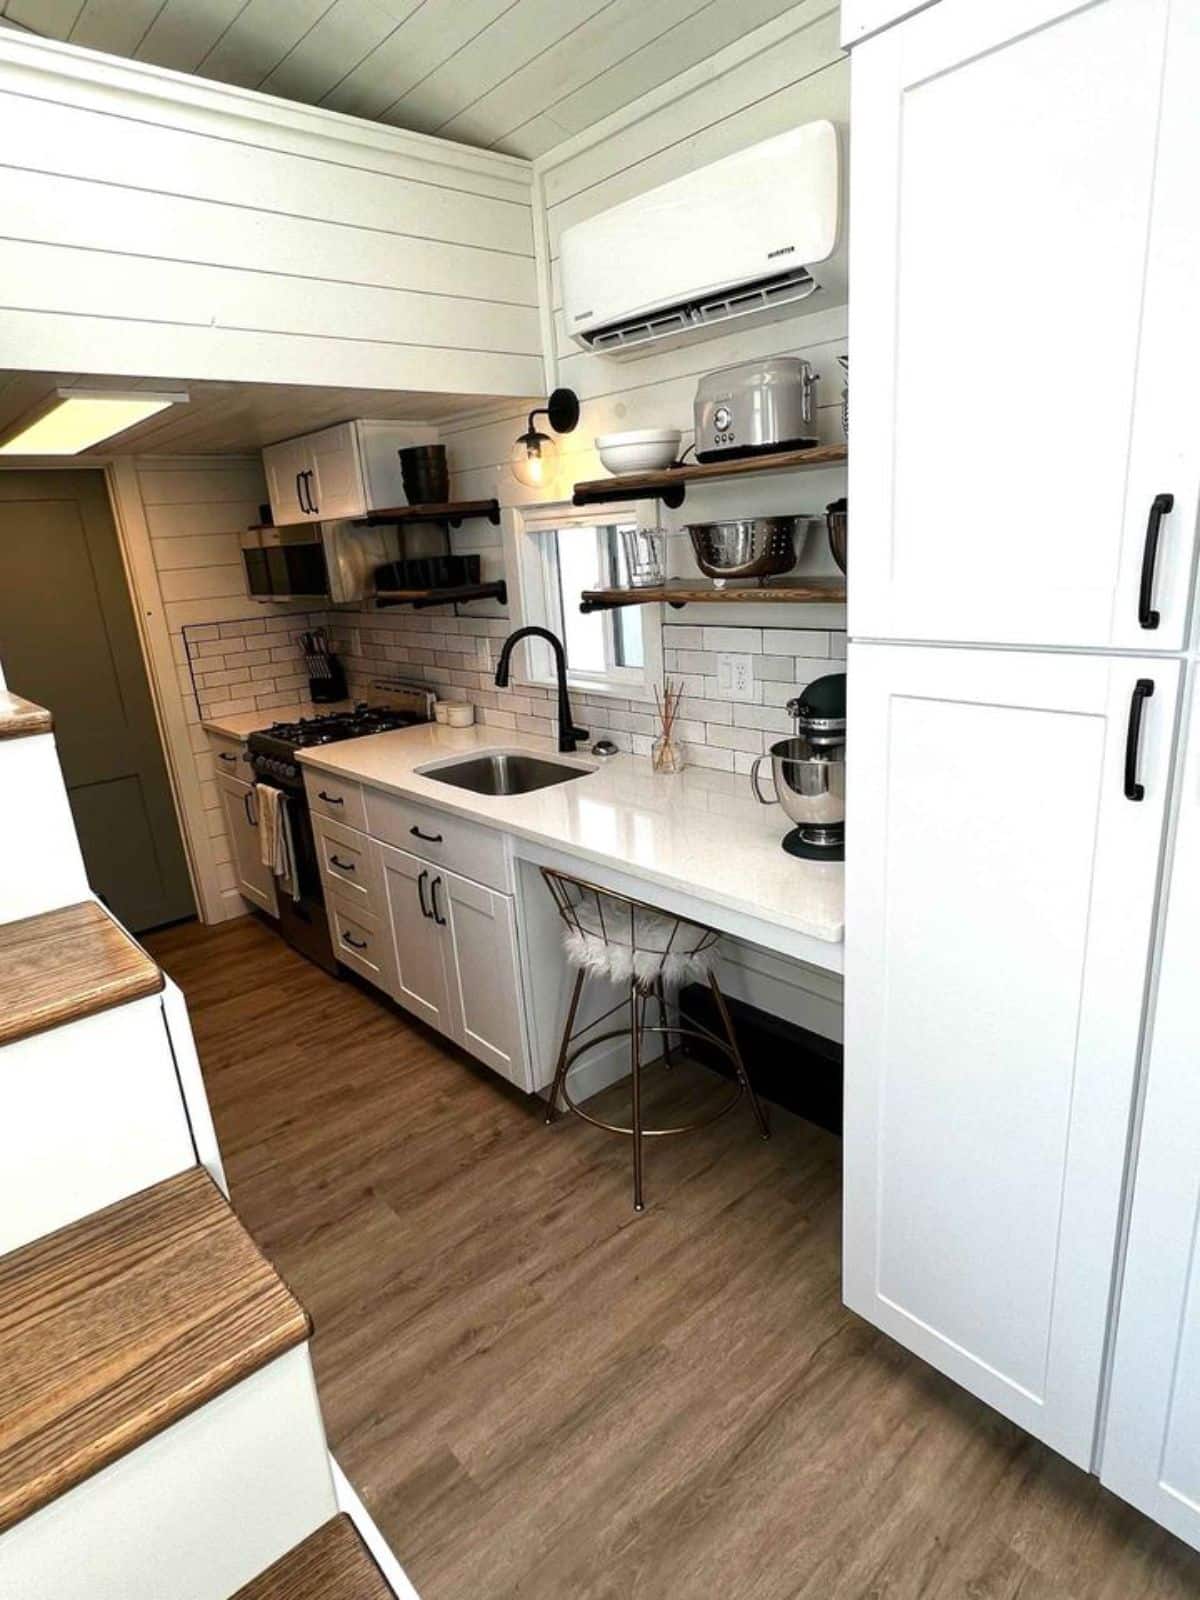 one side of the kitchen has a countertop, stove cum oven and storage with a huge pantry cabinet